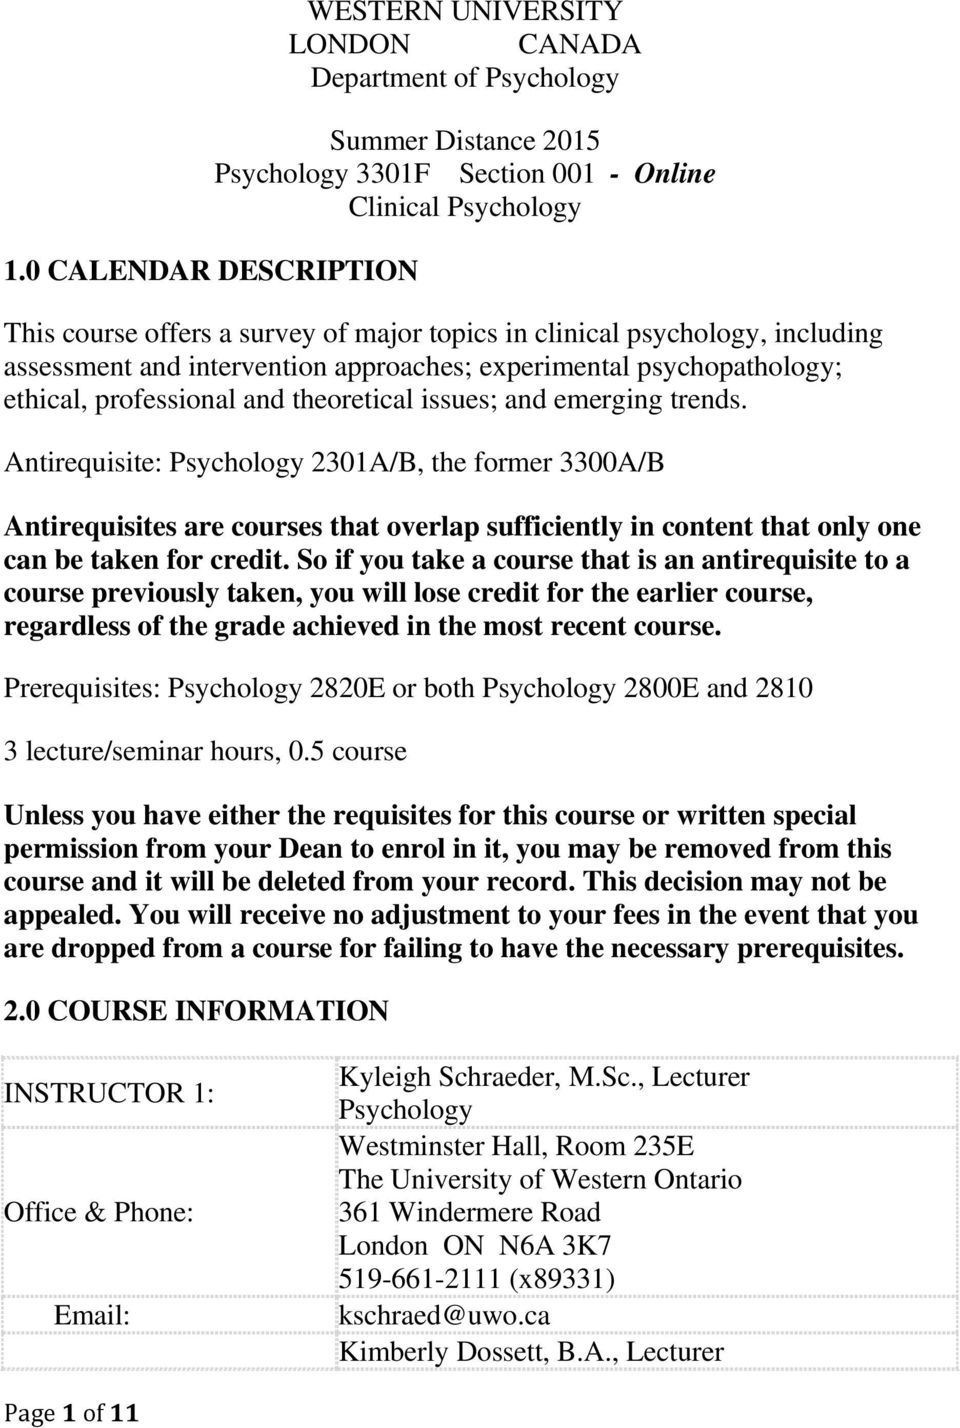 theoretical issues; and emerging trends. Antirequisite: Psychology 2301A/B, the former 3300A/B Antirequisites are courses that overlap sufficiently in content that only one can be taken for credit.